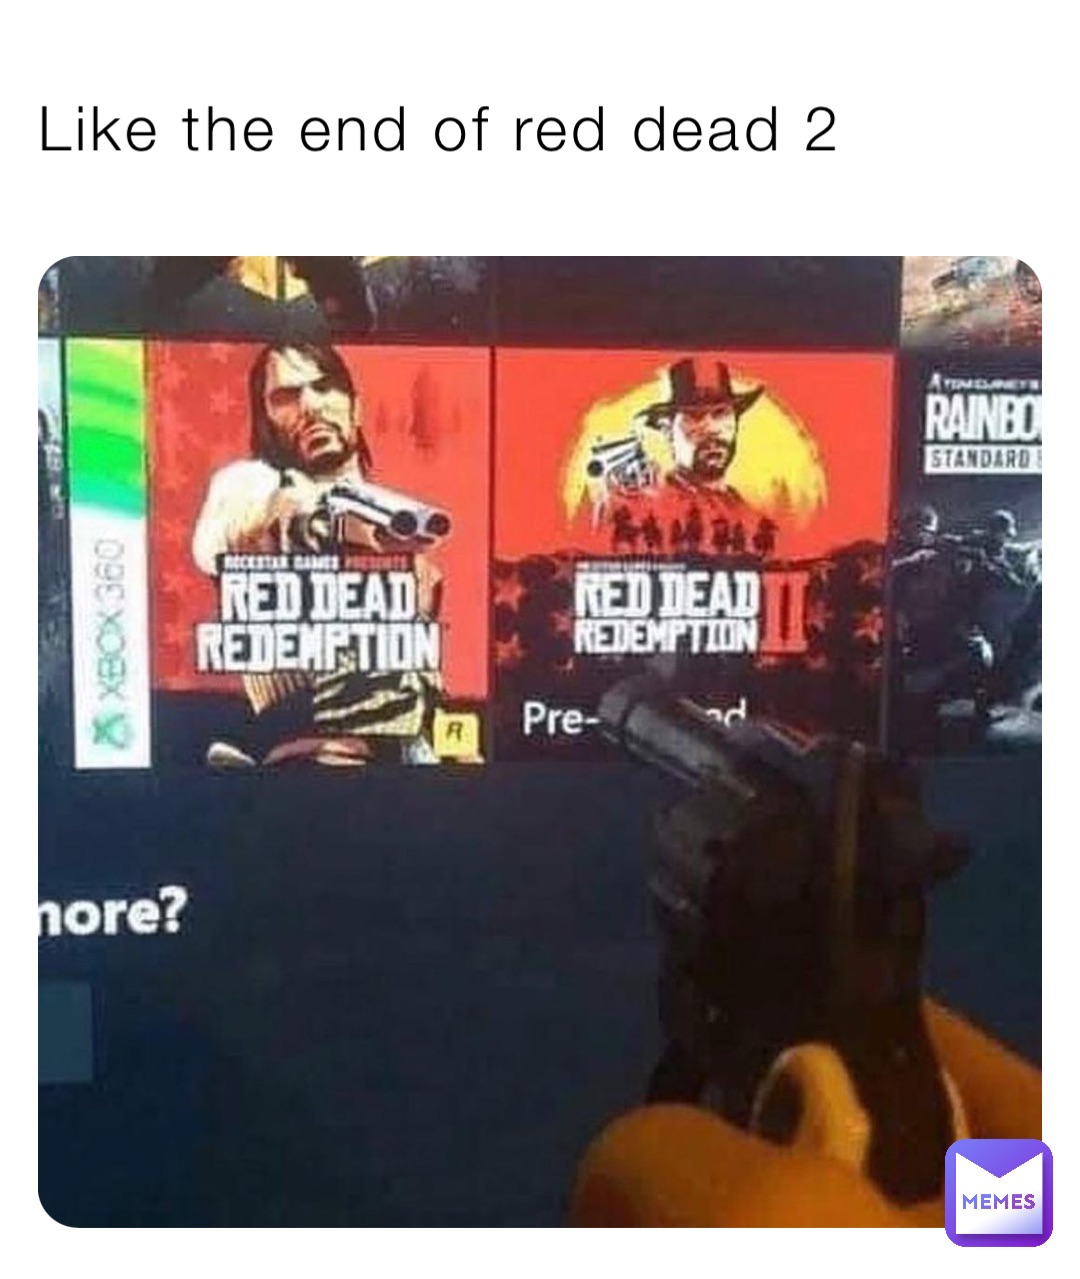 Like the end of red dead 2